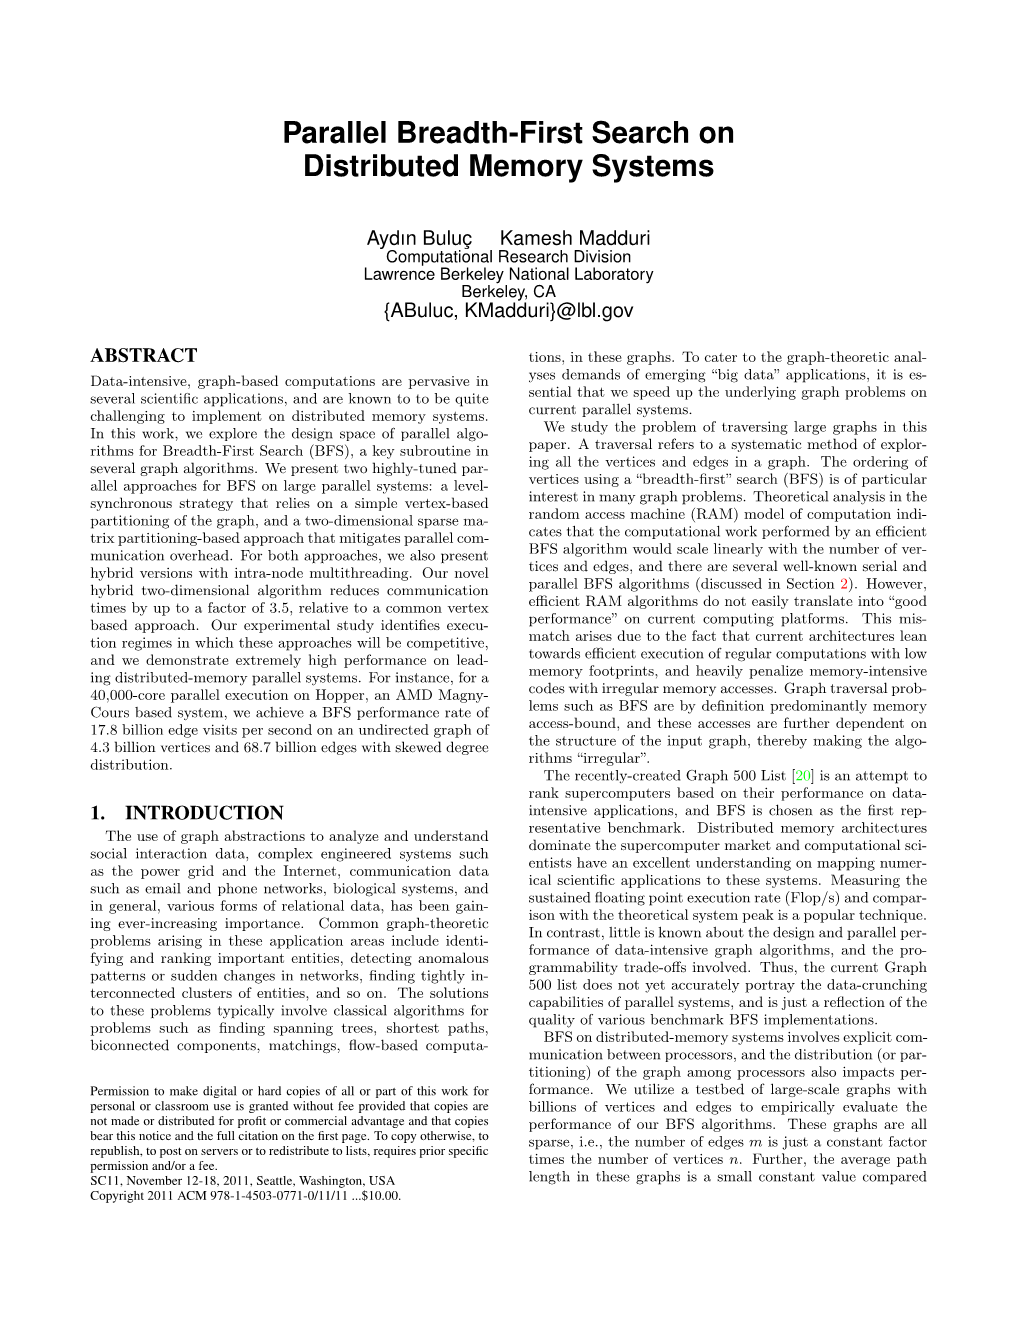 Parallel Breadth-First Search on Distributed Memory Systems